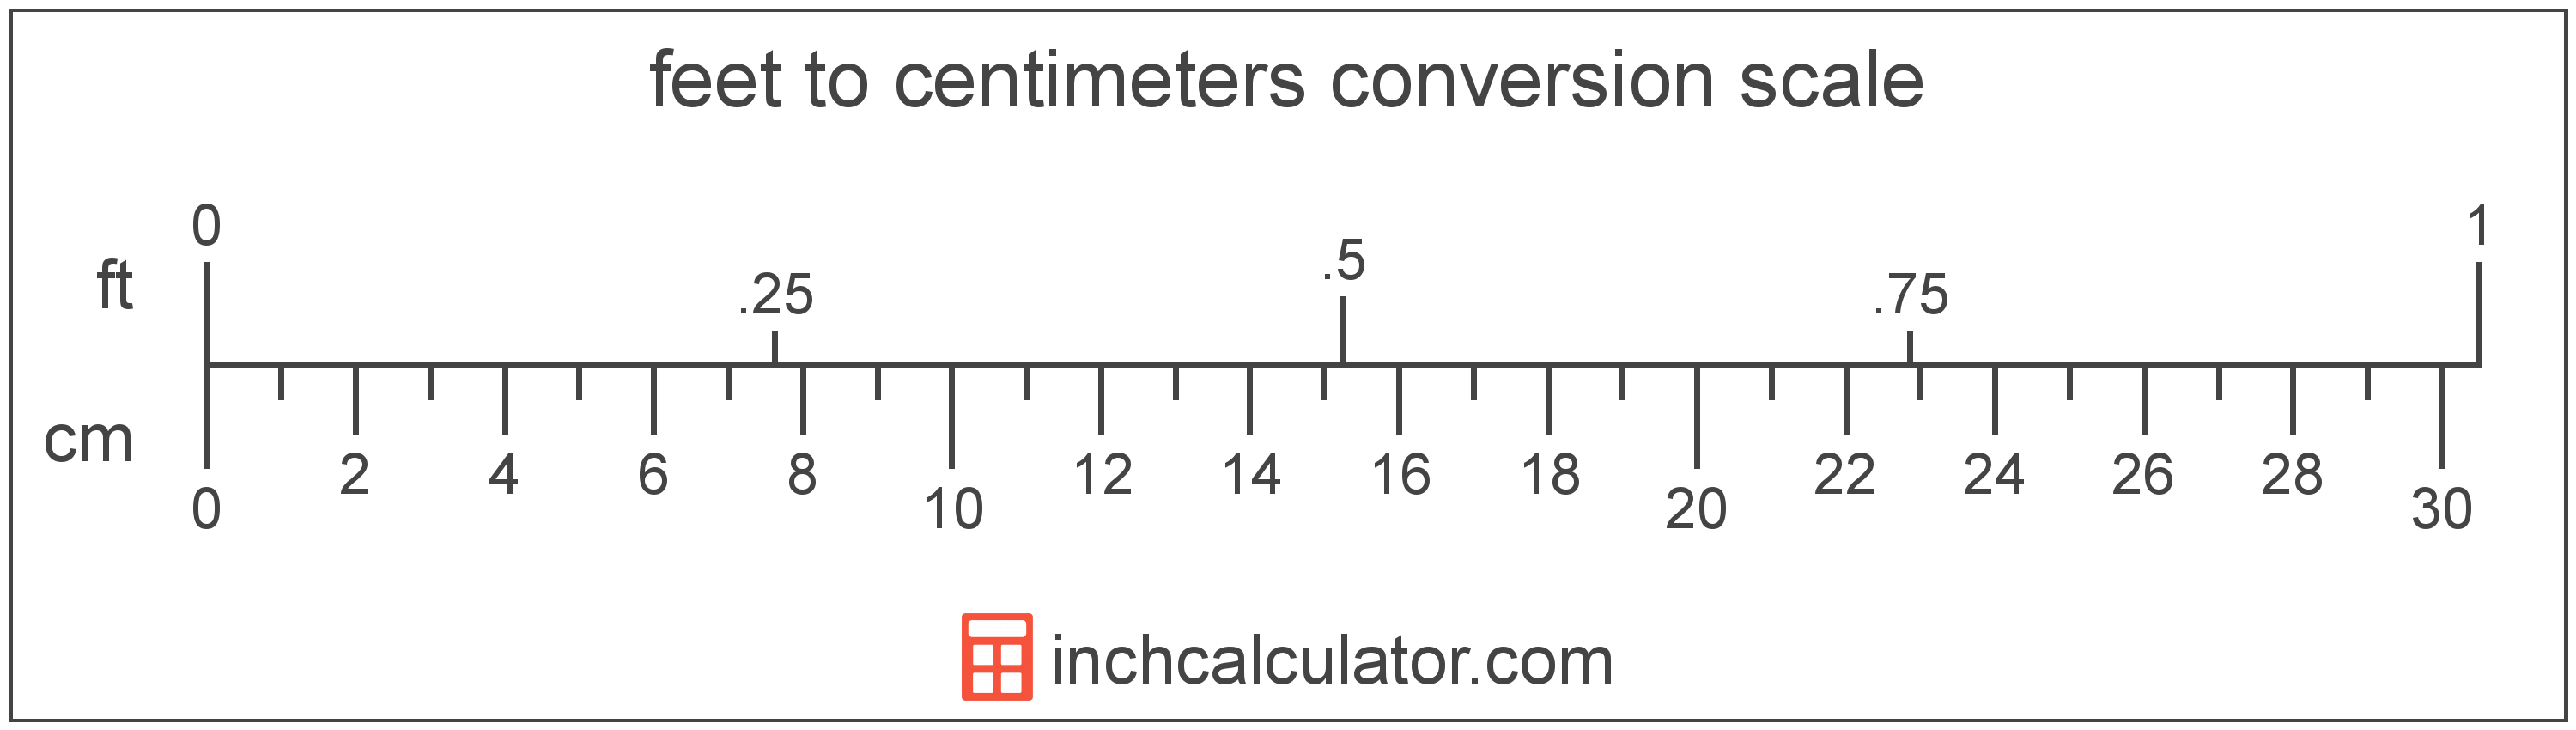 Height Feet To Centimeter Conversion Chart